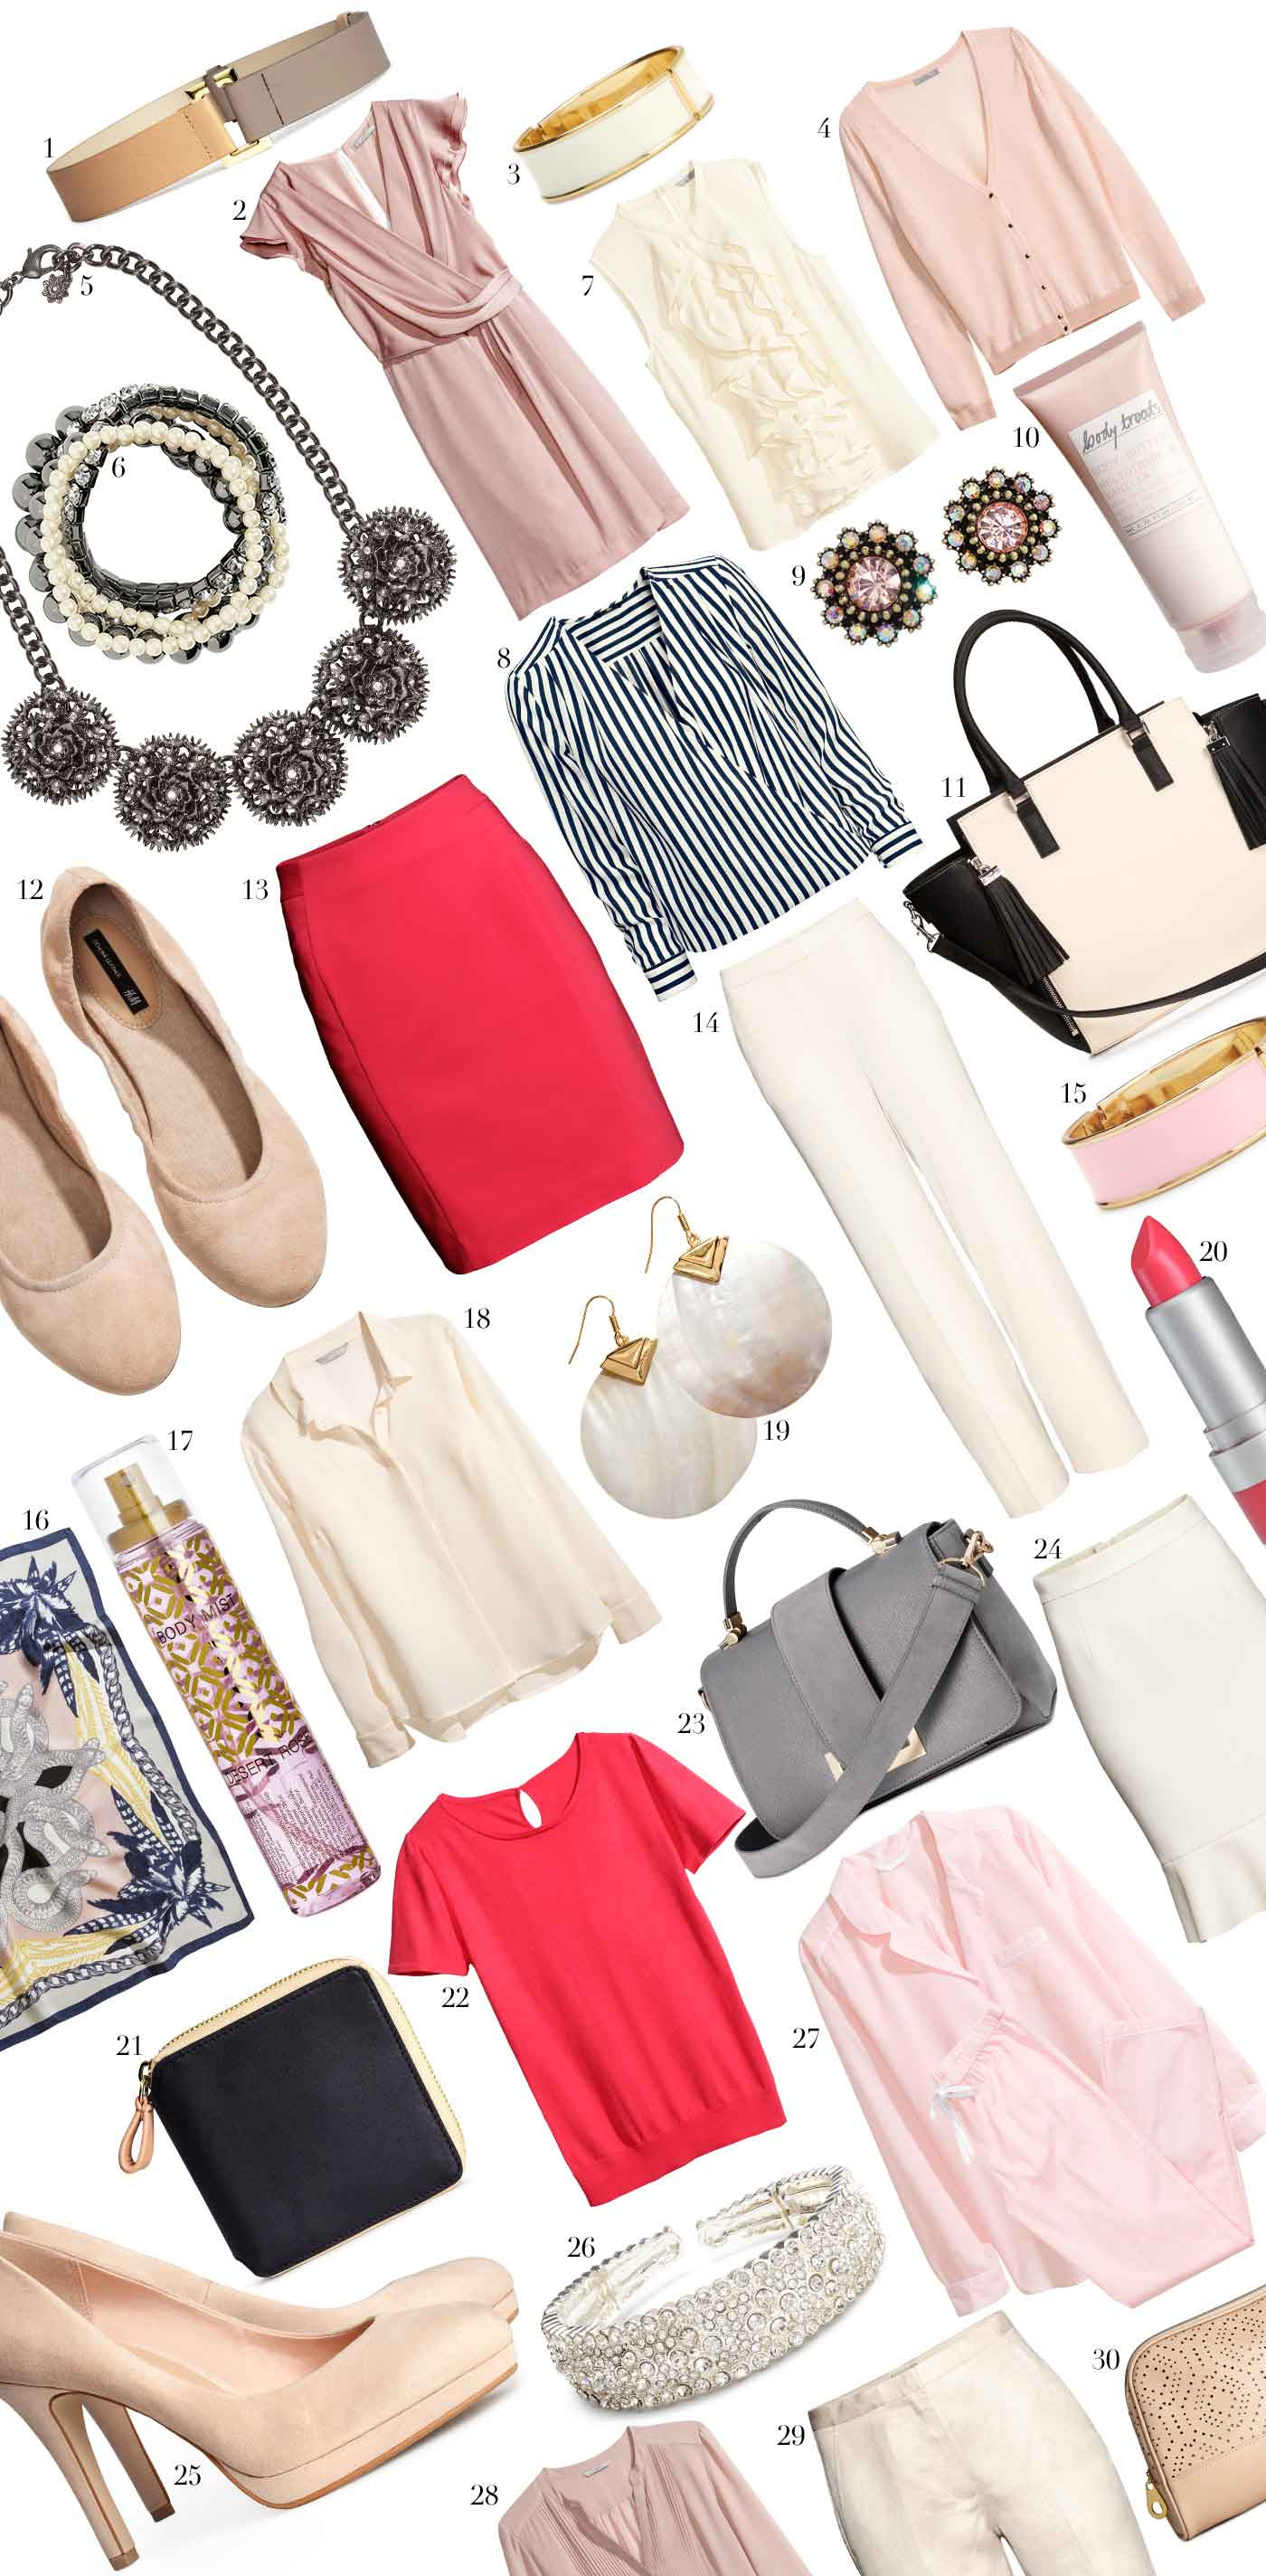 H&M Mother's Day Gift Ideas